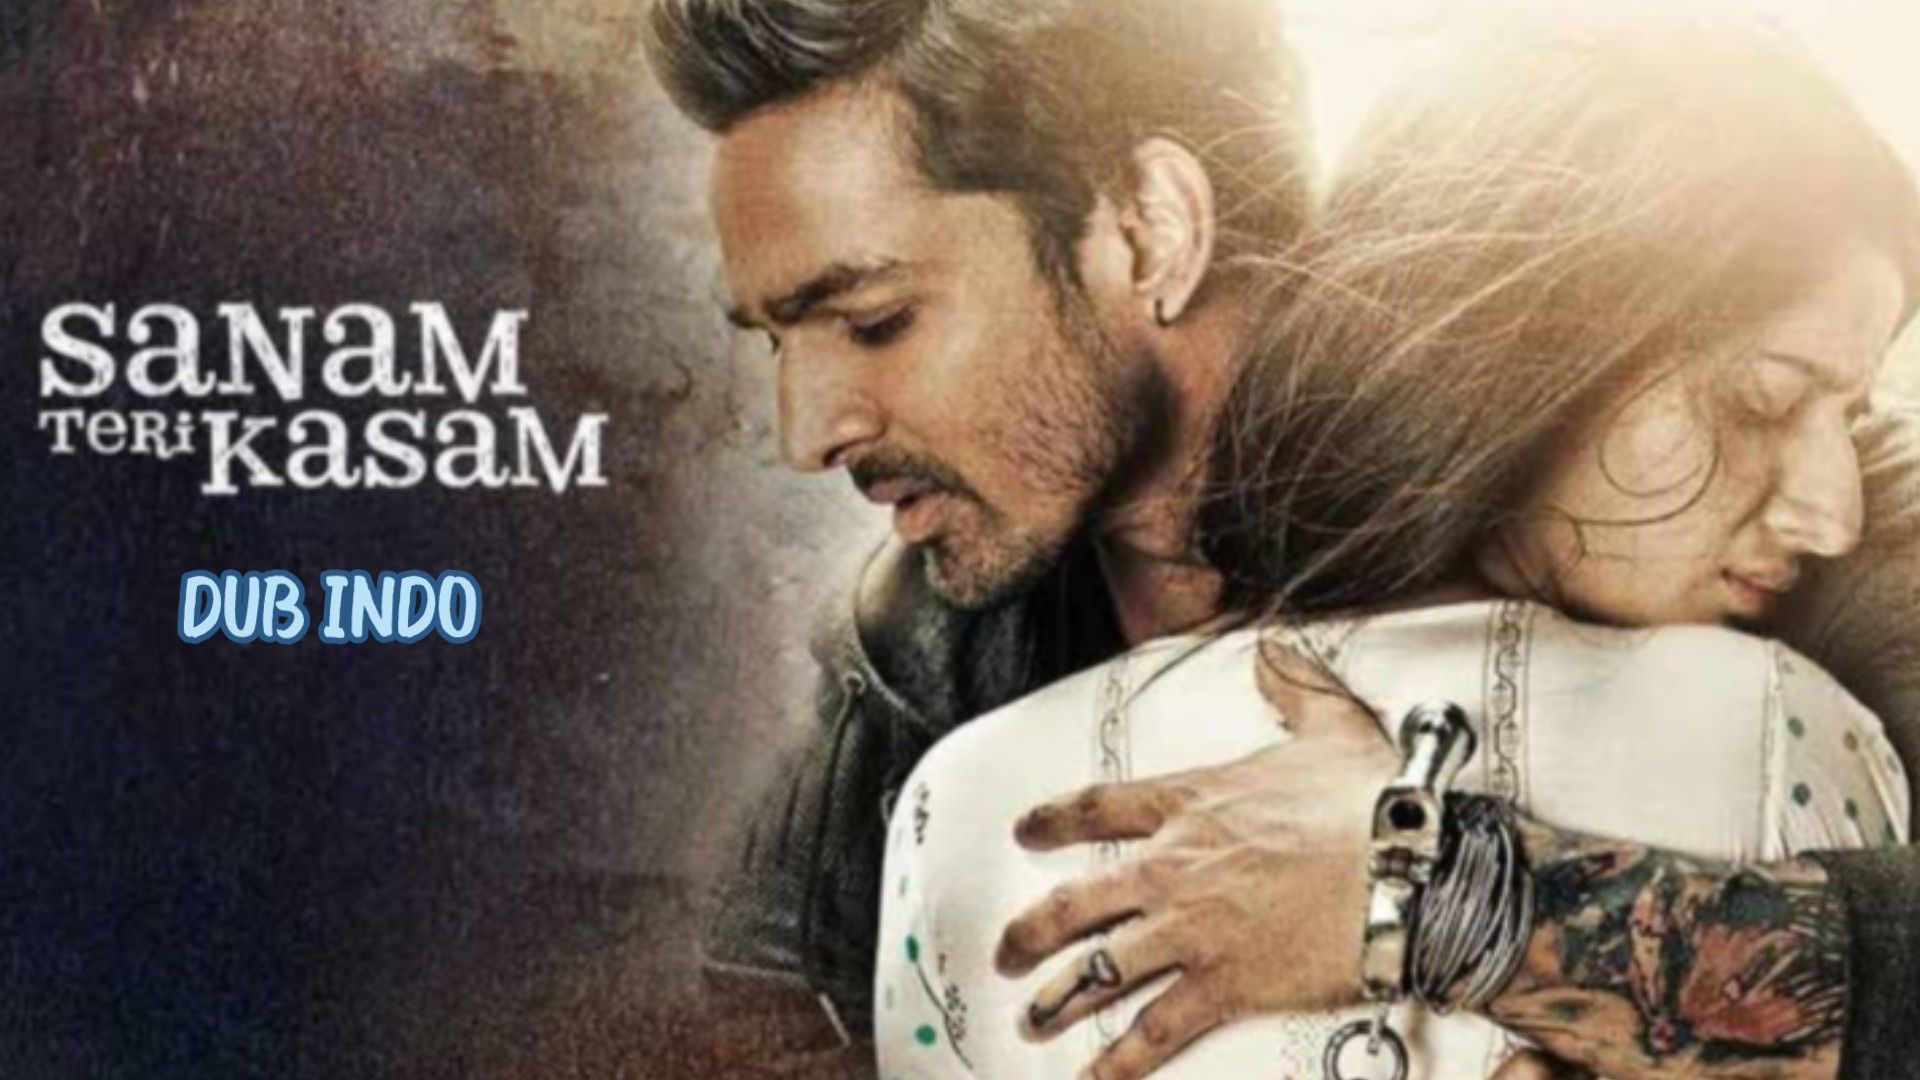 Sanam Teri Kasam promises a musical treat for film lovers! | India Forums